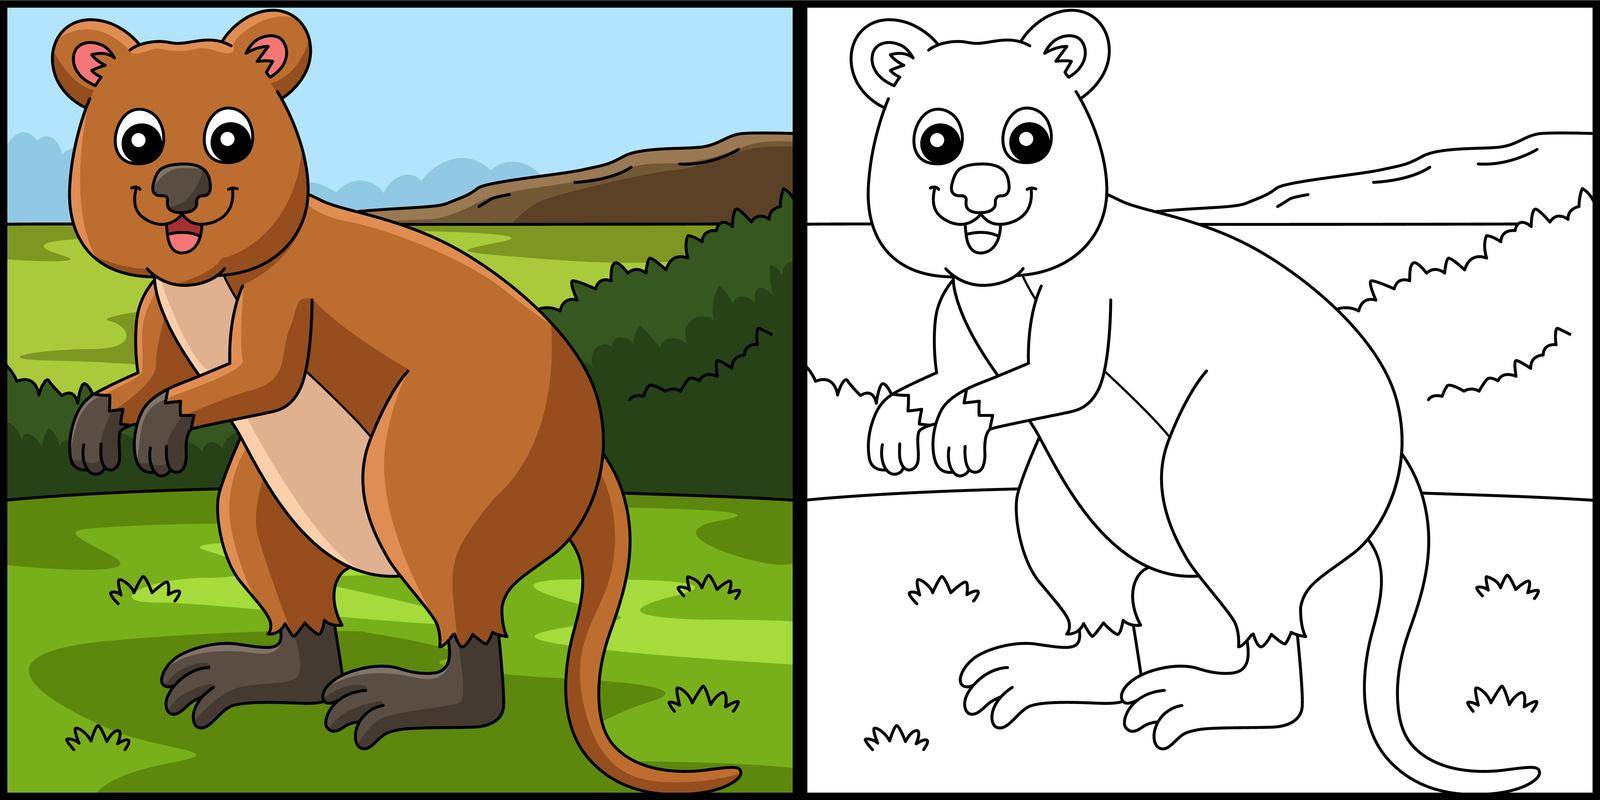 This coloring page shows a quokka animal. One side of this illustration is colored and serves as an inspiration for children.